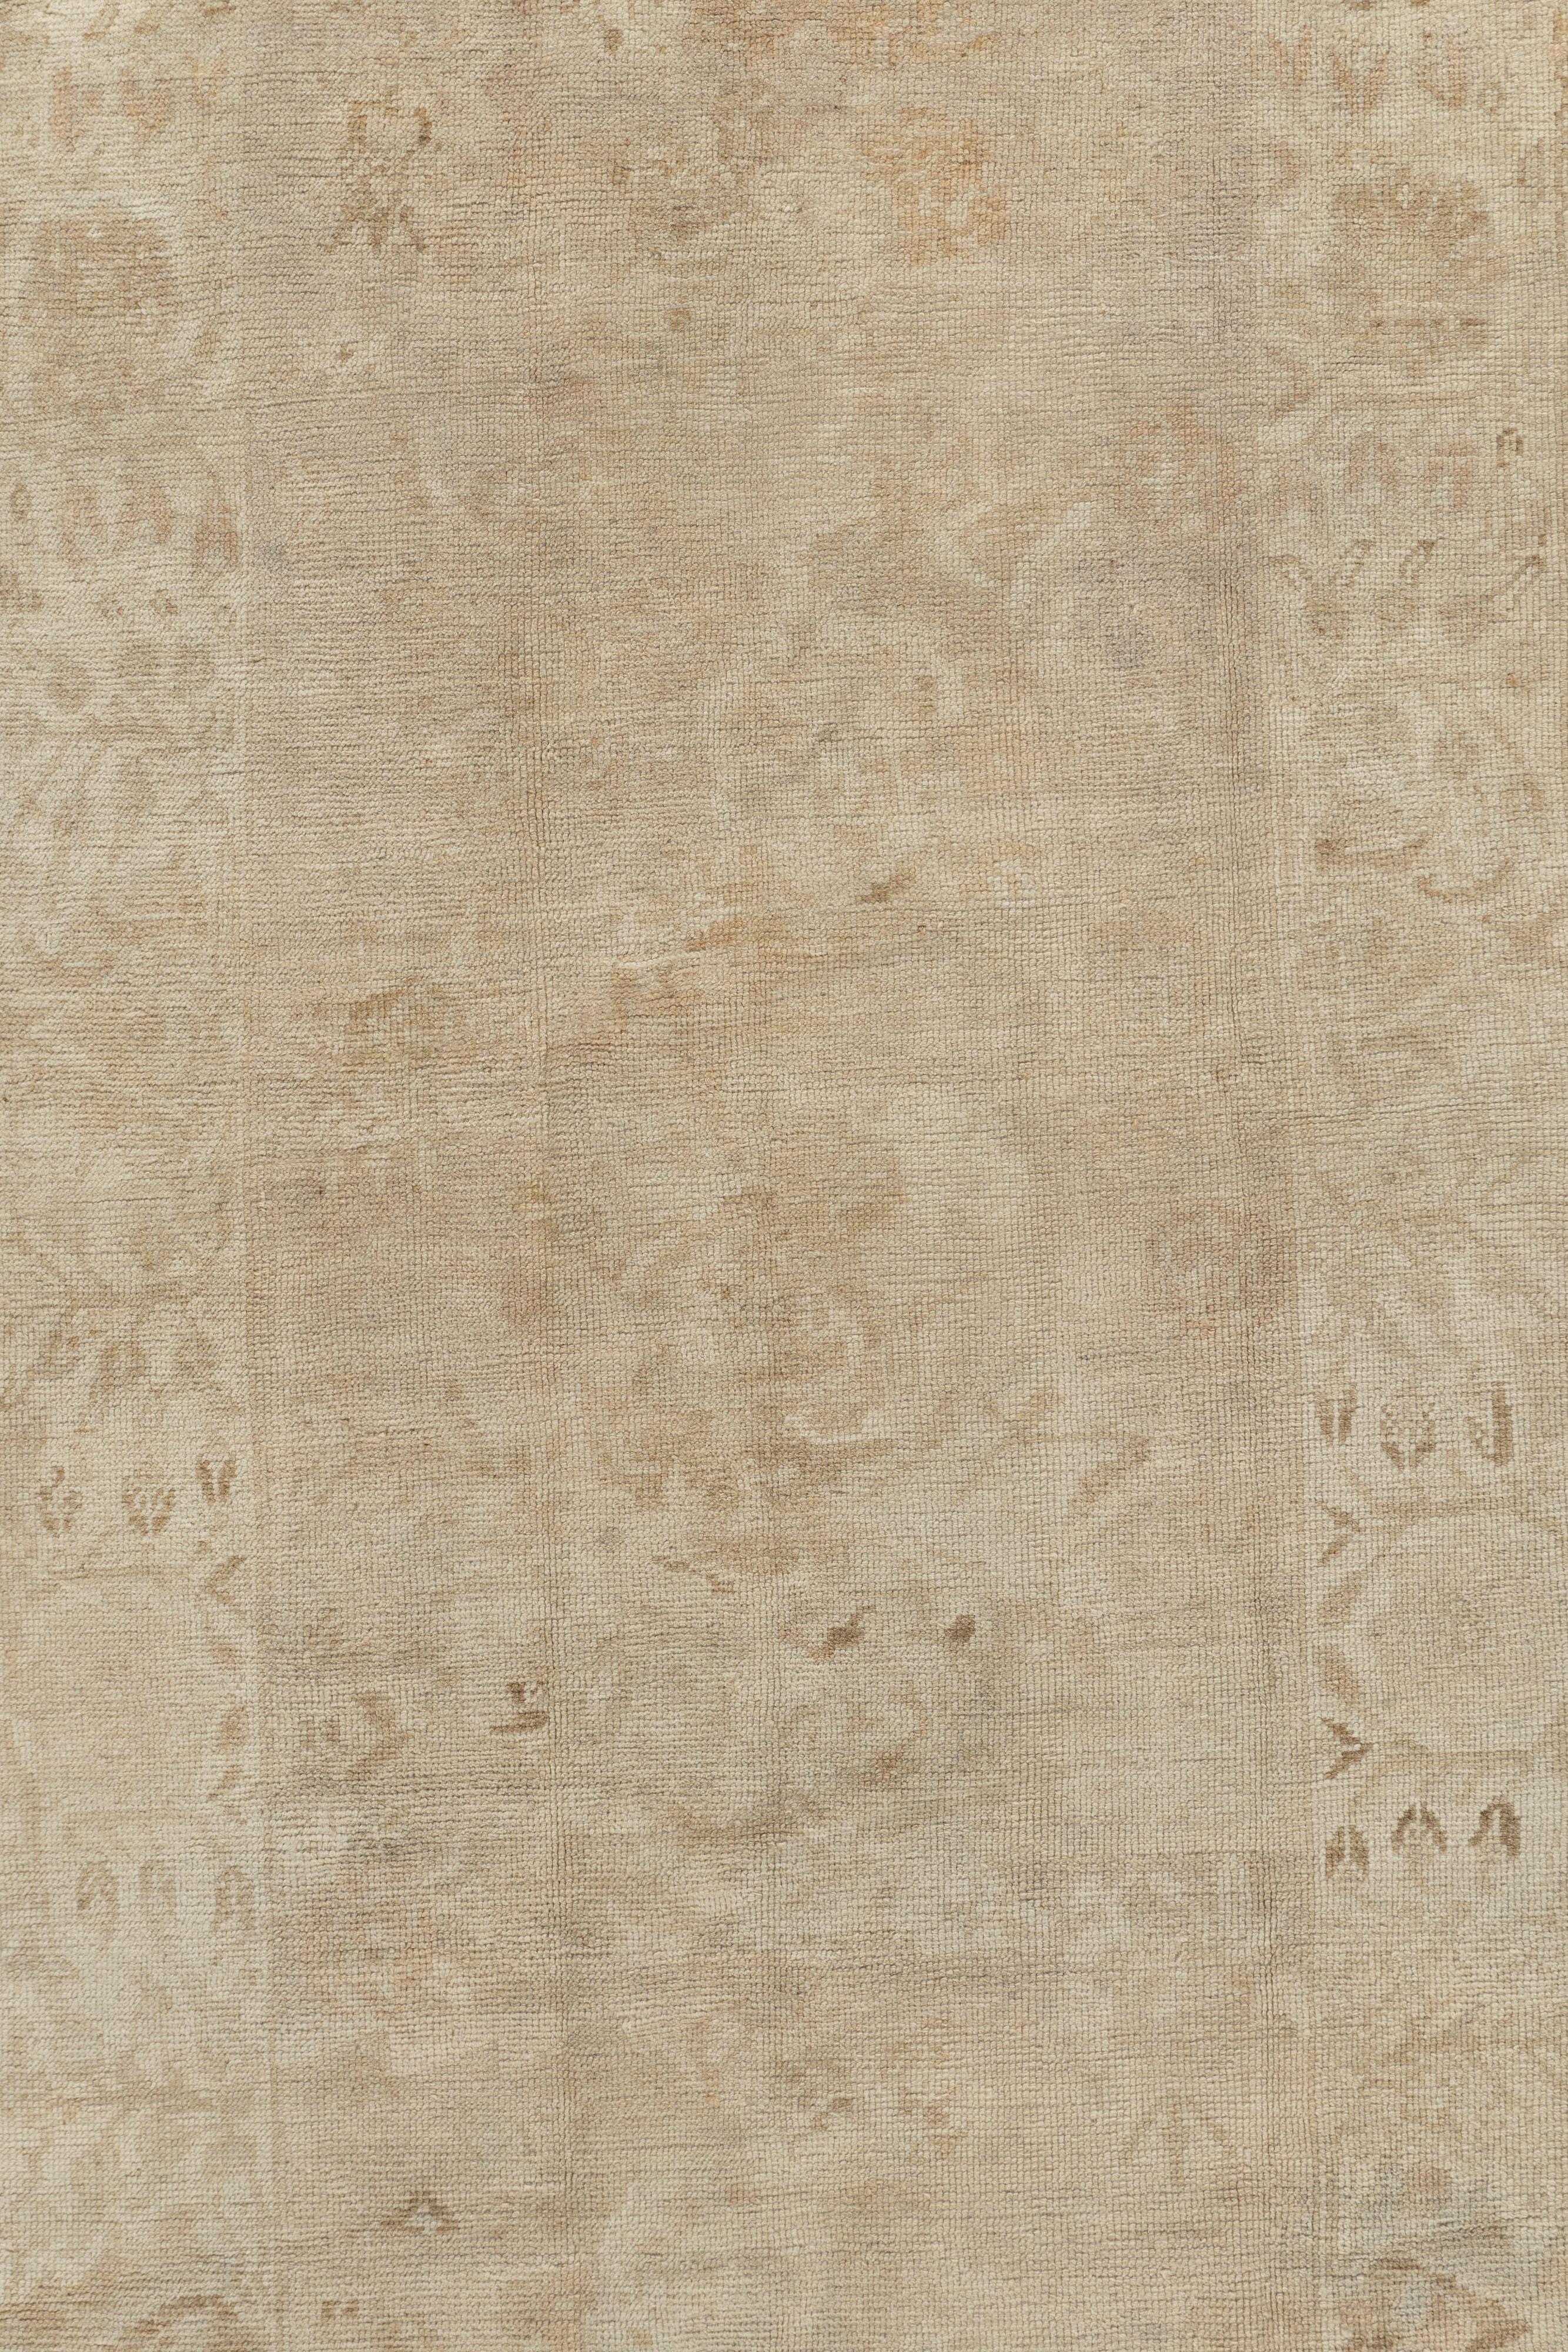 Vintage Turkish Oushak Rug 3'8 X 9'2. Even today, Oushak rugs are still the first choice of professional interior designers. Sometimes this is because when grading Oushak carpets, carpet connoisseurs will not only look at the overall quality of